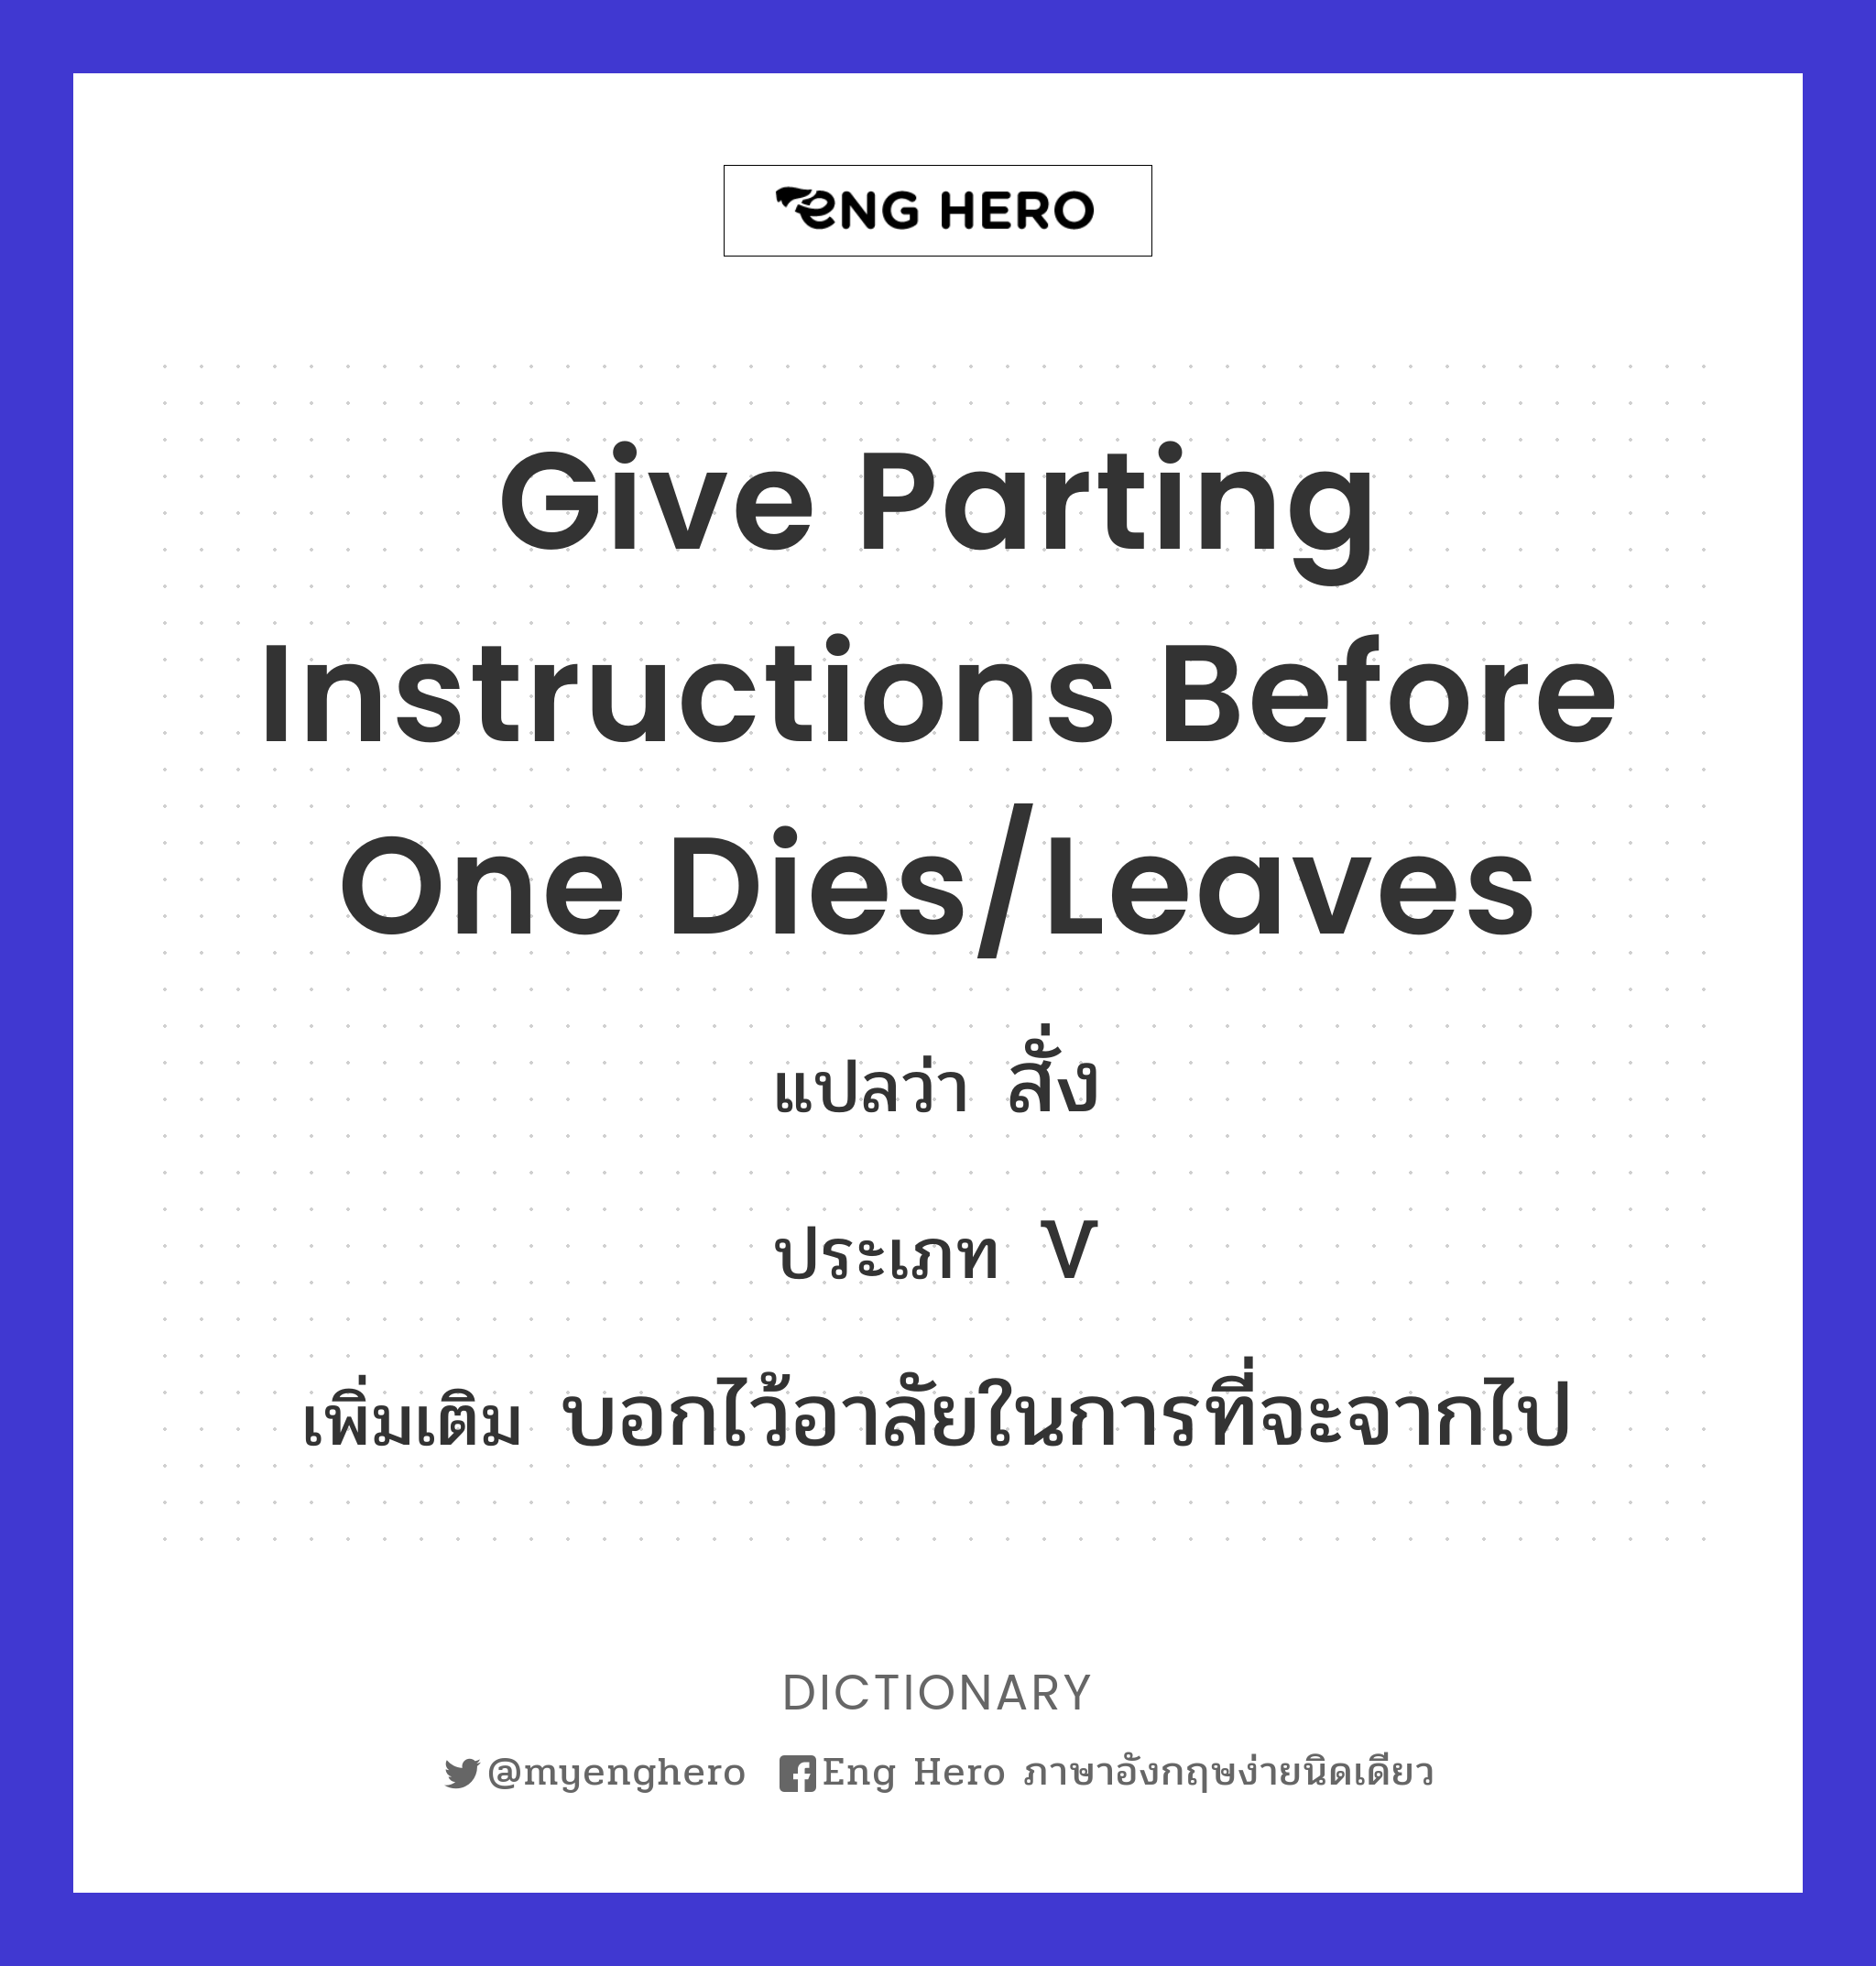 give parting instructions before one dies/leaves